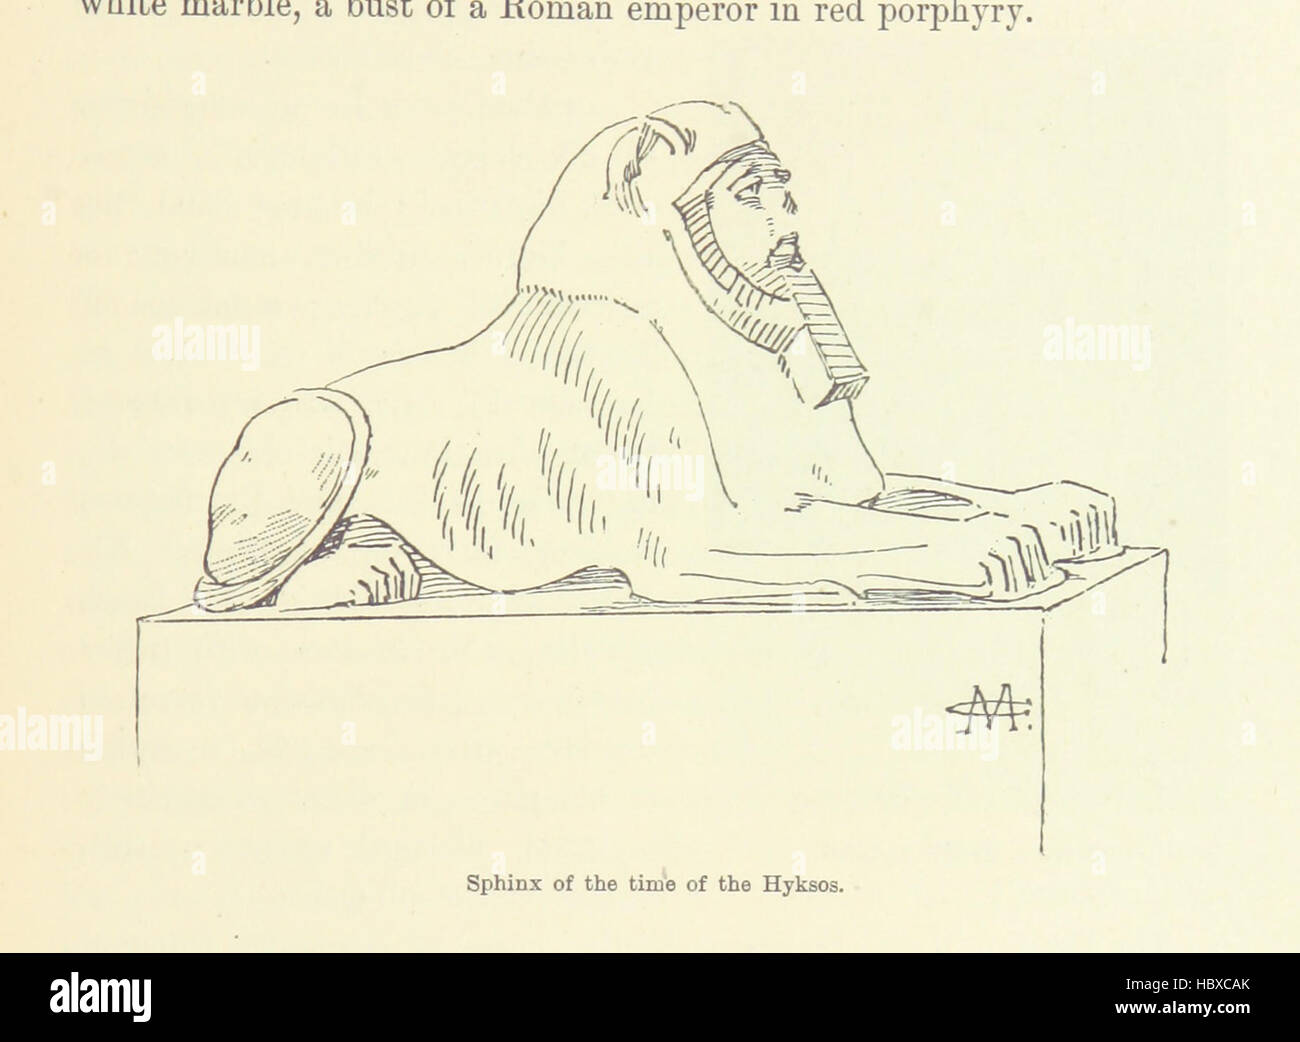 Image taken from page 371 of 'The Land of the Sphinx ... With ... illustrations, etc' Image taken from page 371 of 'The Land of the Stock Photo